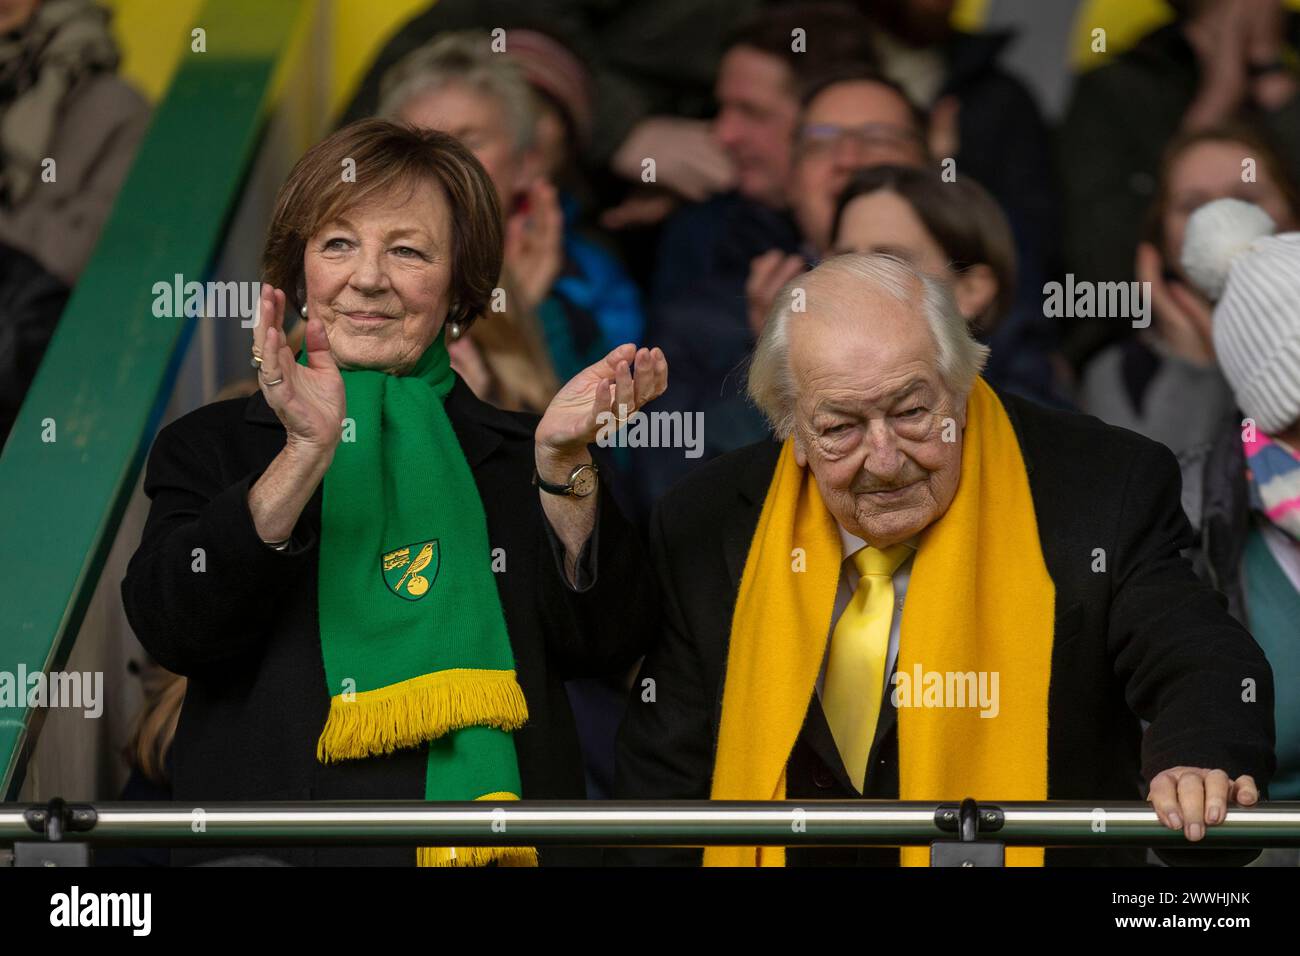 Norwich on Sunday 24th March 2024. Delia Smith and Michael Wynn-Jones, owners of Norwich City FC is seen in the stands during the FA Women's National League Division One match between Norwich City Women and Queens Park Rangers at Carrow Road, Norwich on Sunday 24th March 2024. (Photo: David Watts | MI News) Credit: MI News & Sport /Alamy Live News Stock Photo